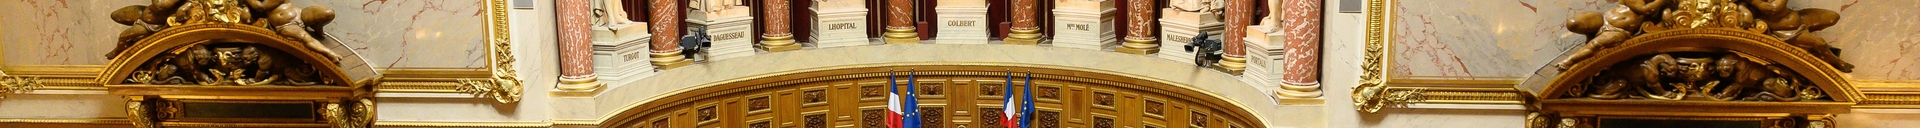 Paris: Castex delivers a speech on stage as part of the government declaration at the Senate